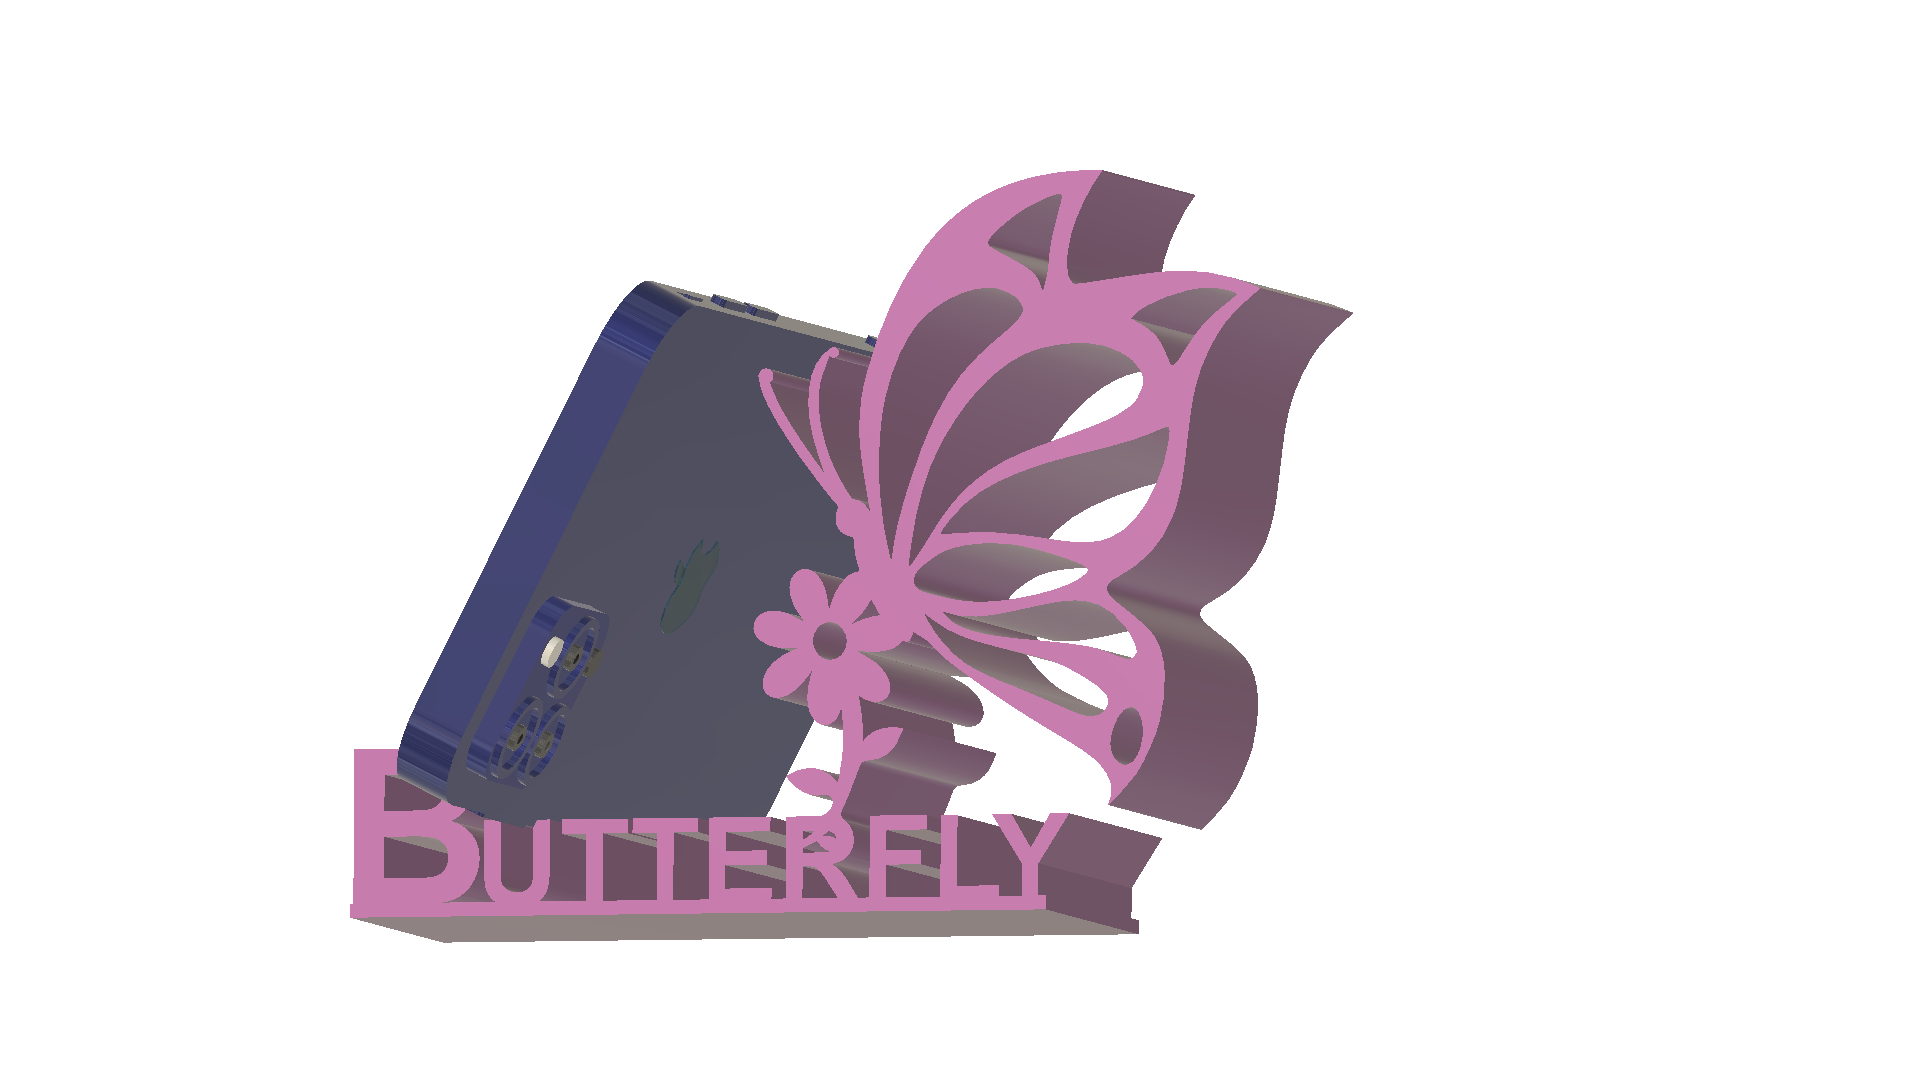 Butterfly_PS_H.png Download STL file Butterfly Shaped Phone Stand • Template to 3D print, 3dPrinted4u